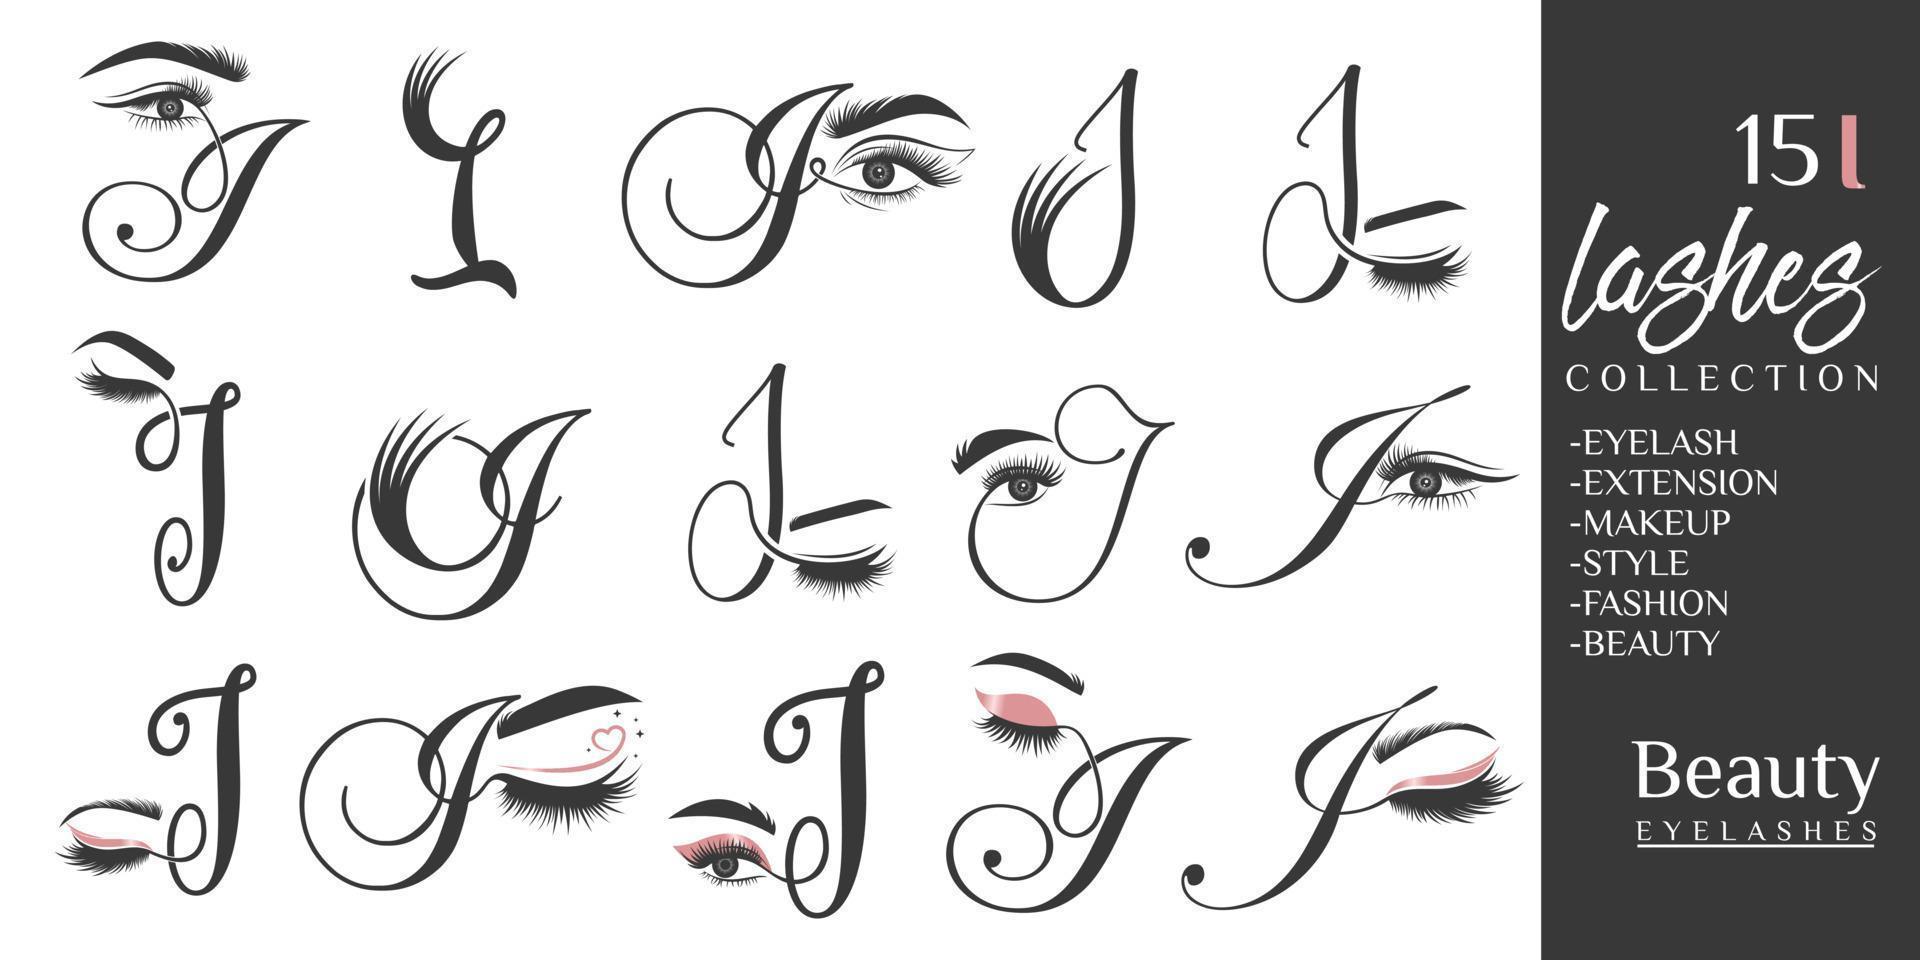 Eyelashes logo with letter I concept vector